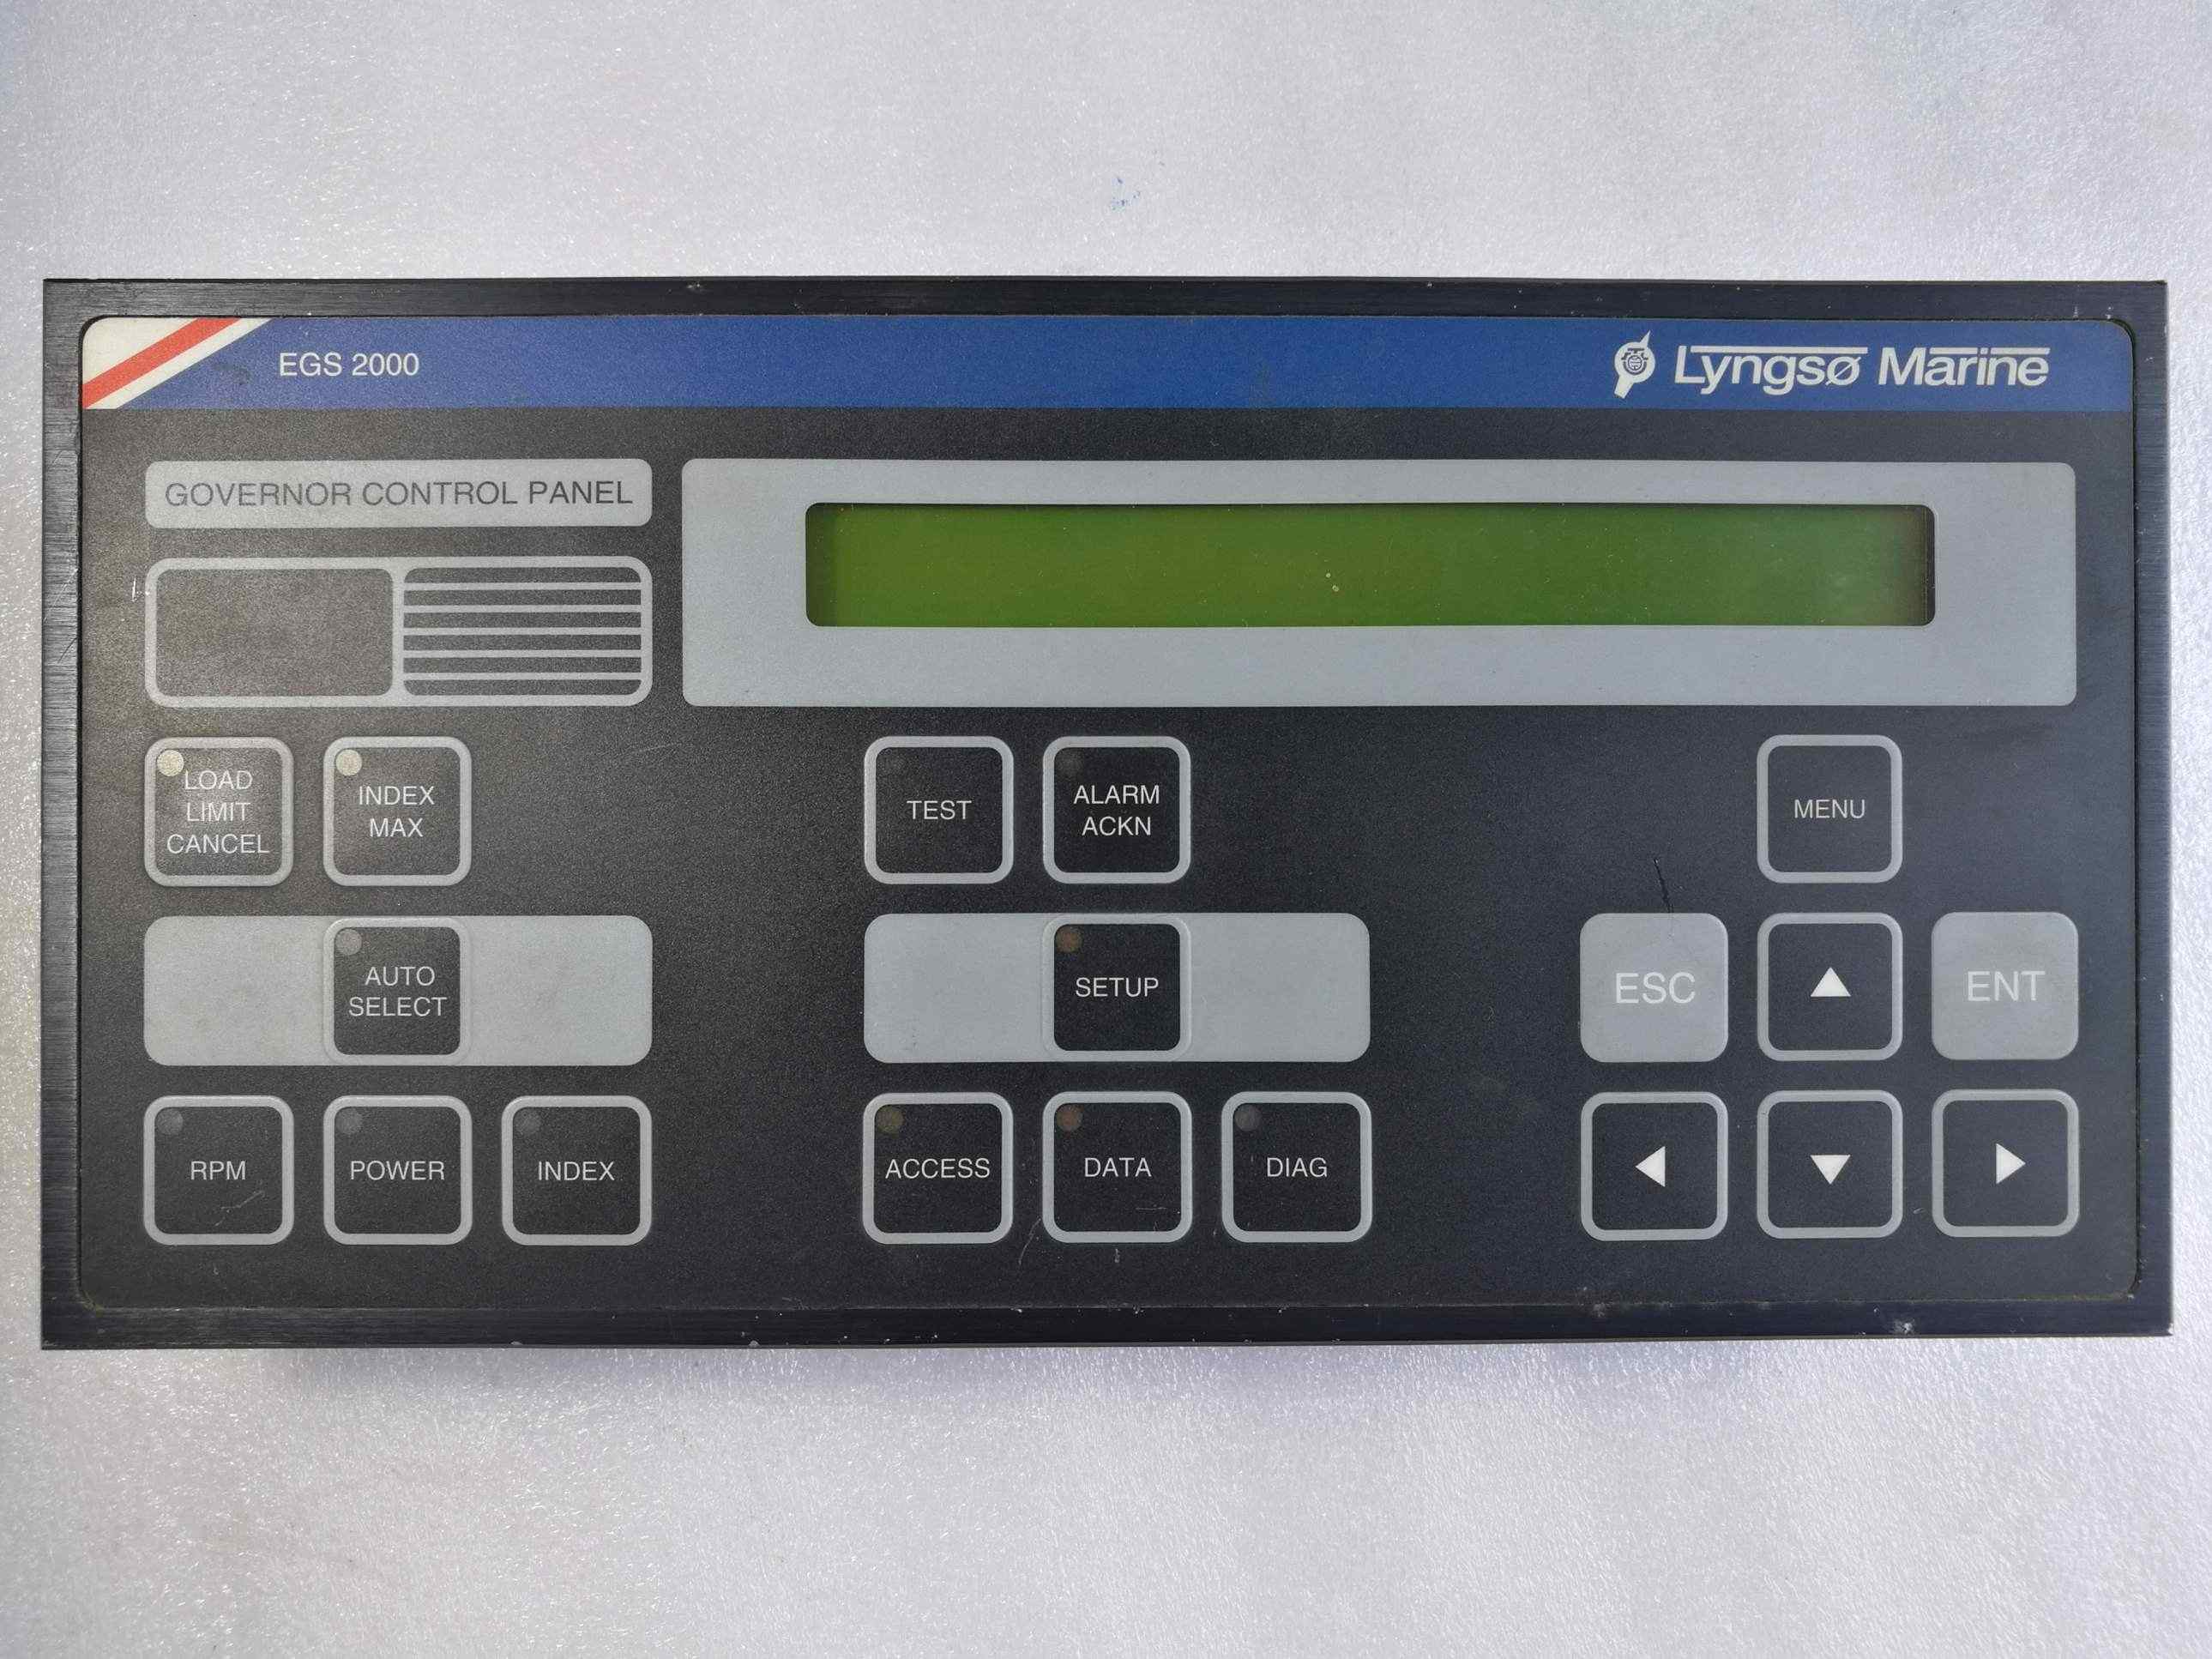 Lyngso Marine EGS 2000 Governor Control Panel